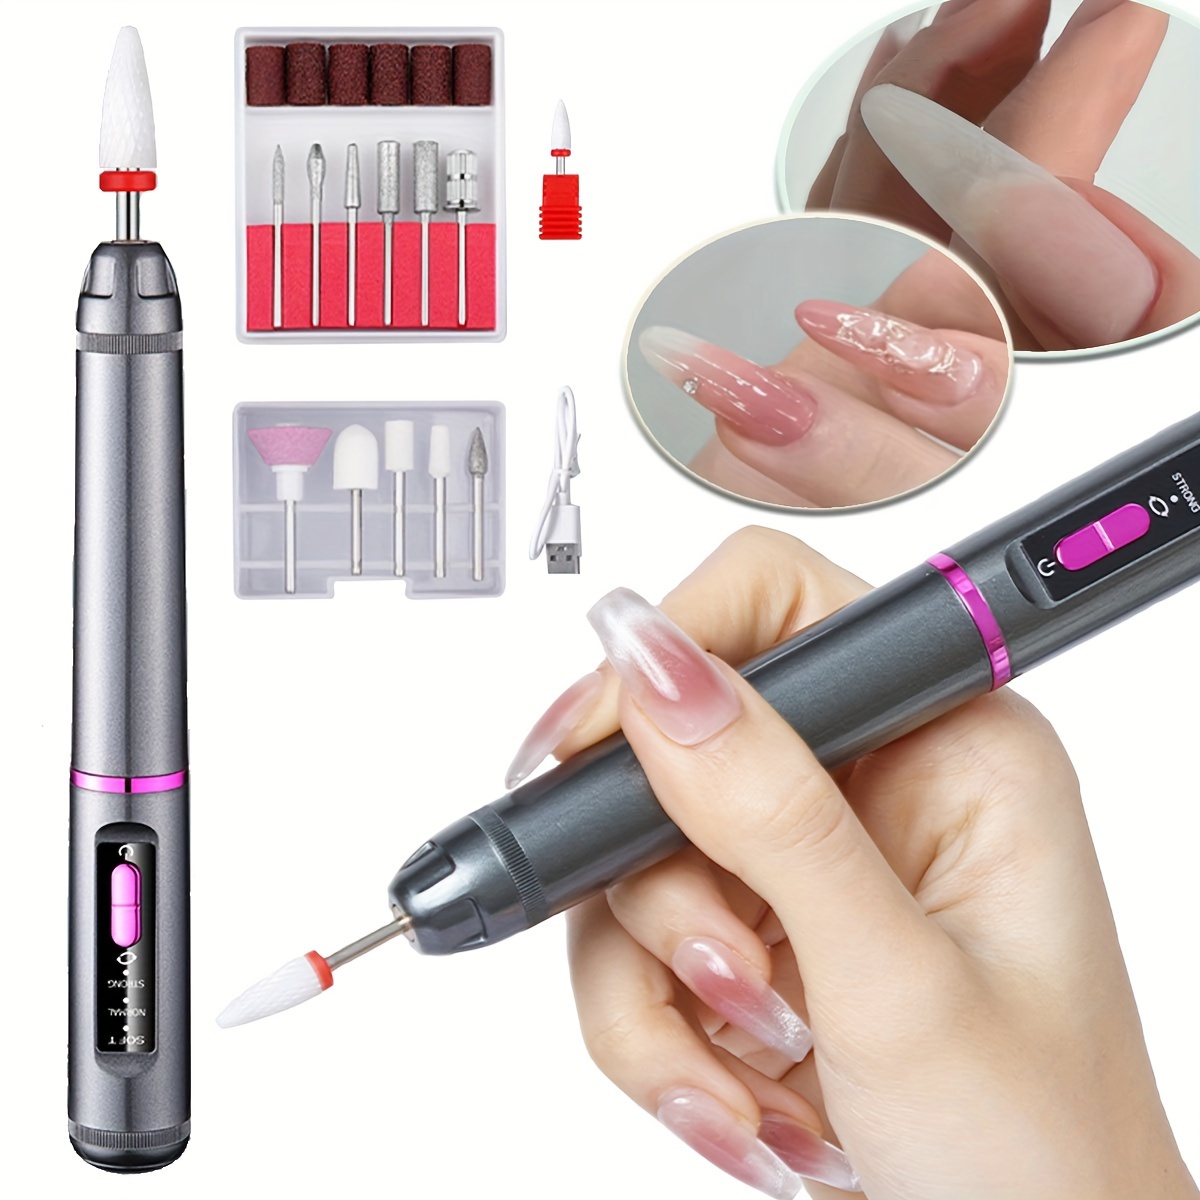 

Portable Electric Nail Drill Set, Manicure Pedicure Tool Kit With 12 Grinding Heads, Adjustable Speed, Usb Rechargeable Nail Polisher For Salon & Home Use